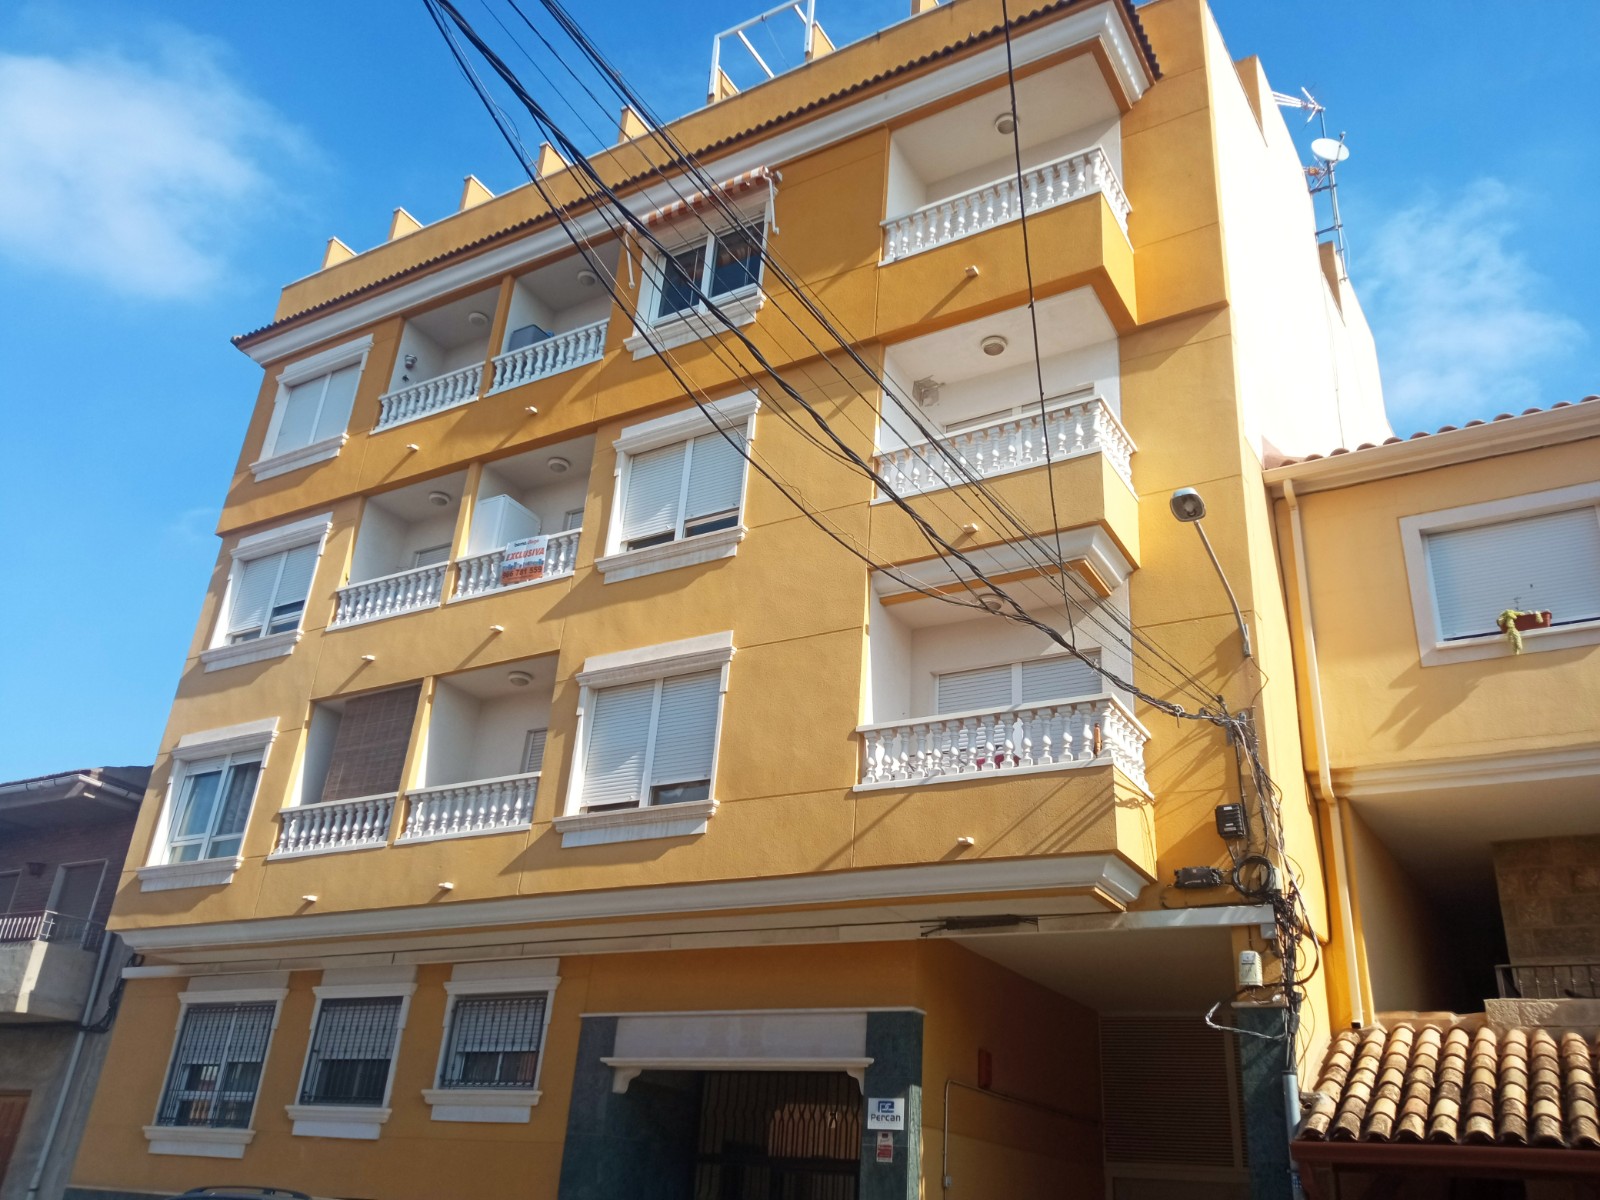 For sale: 1 bedroom apartment / flat in Almoradí